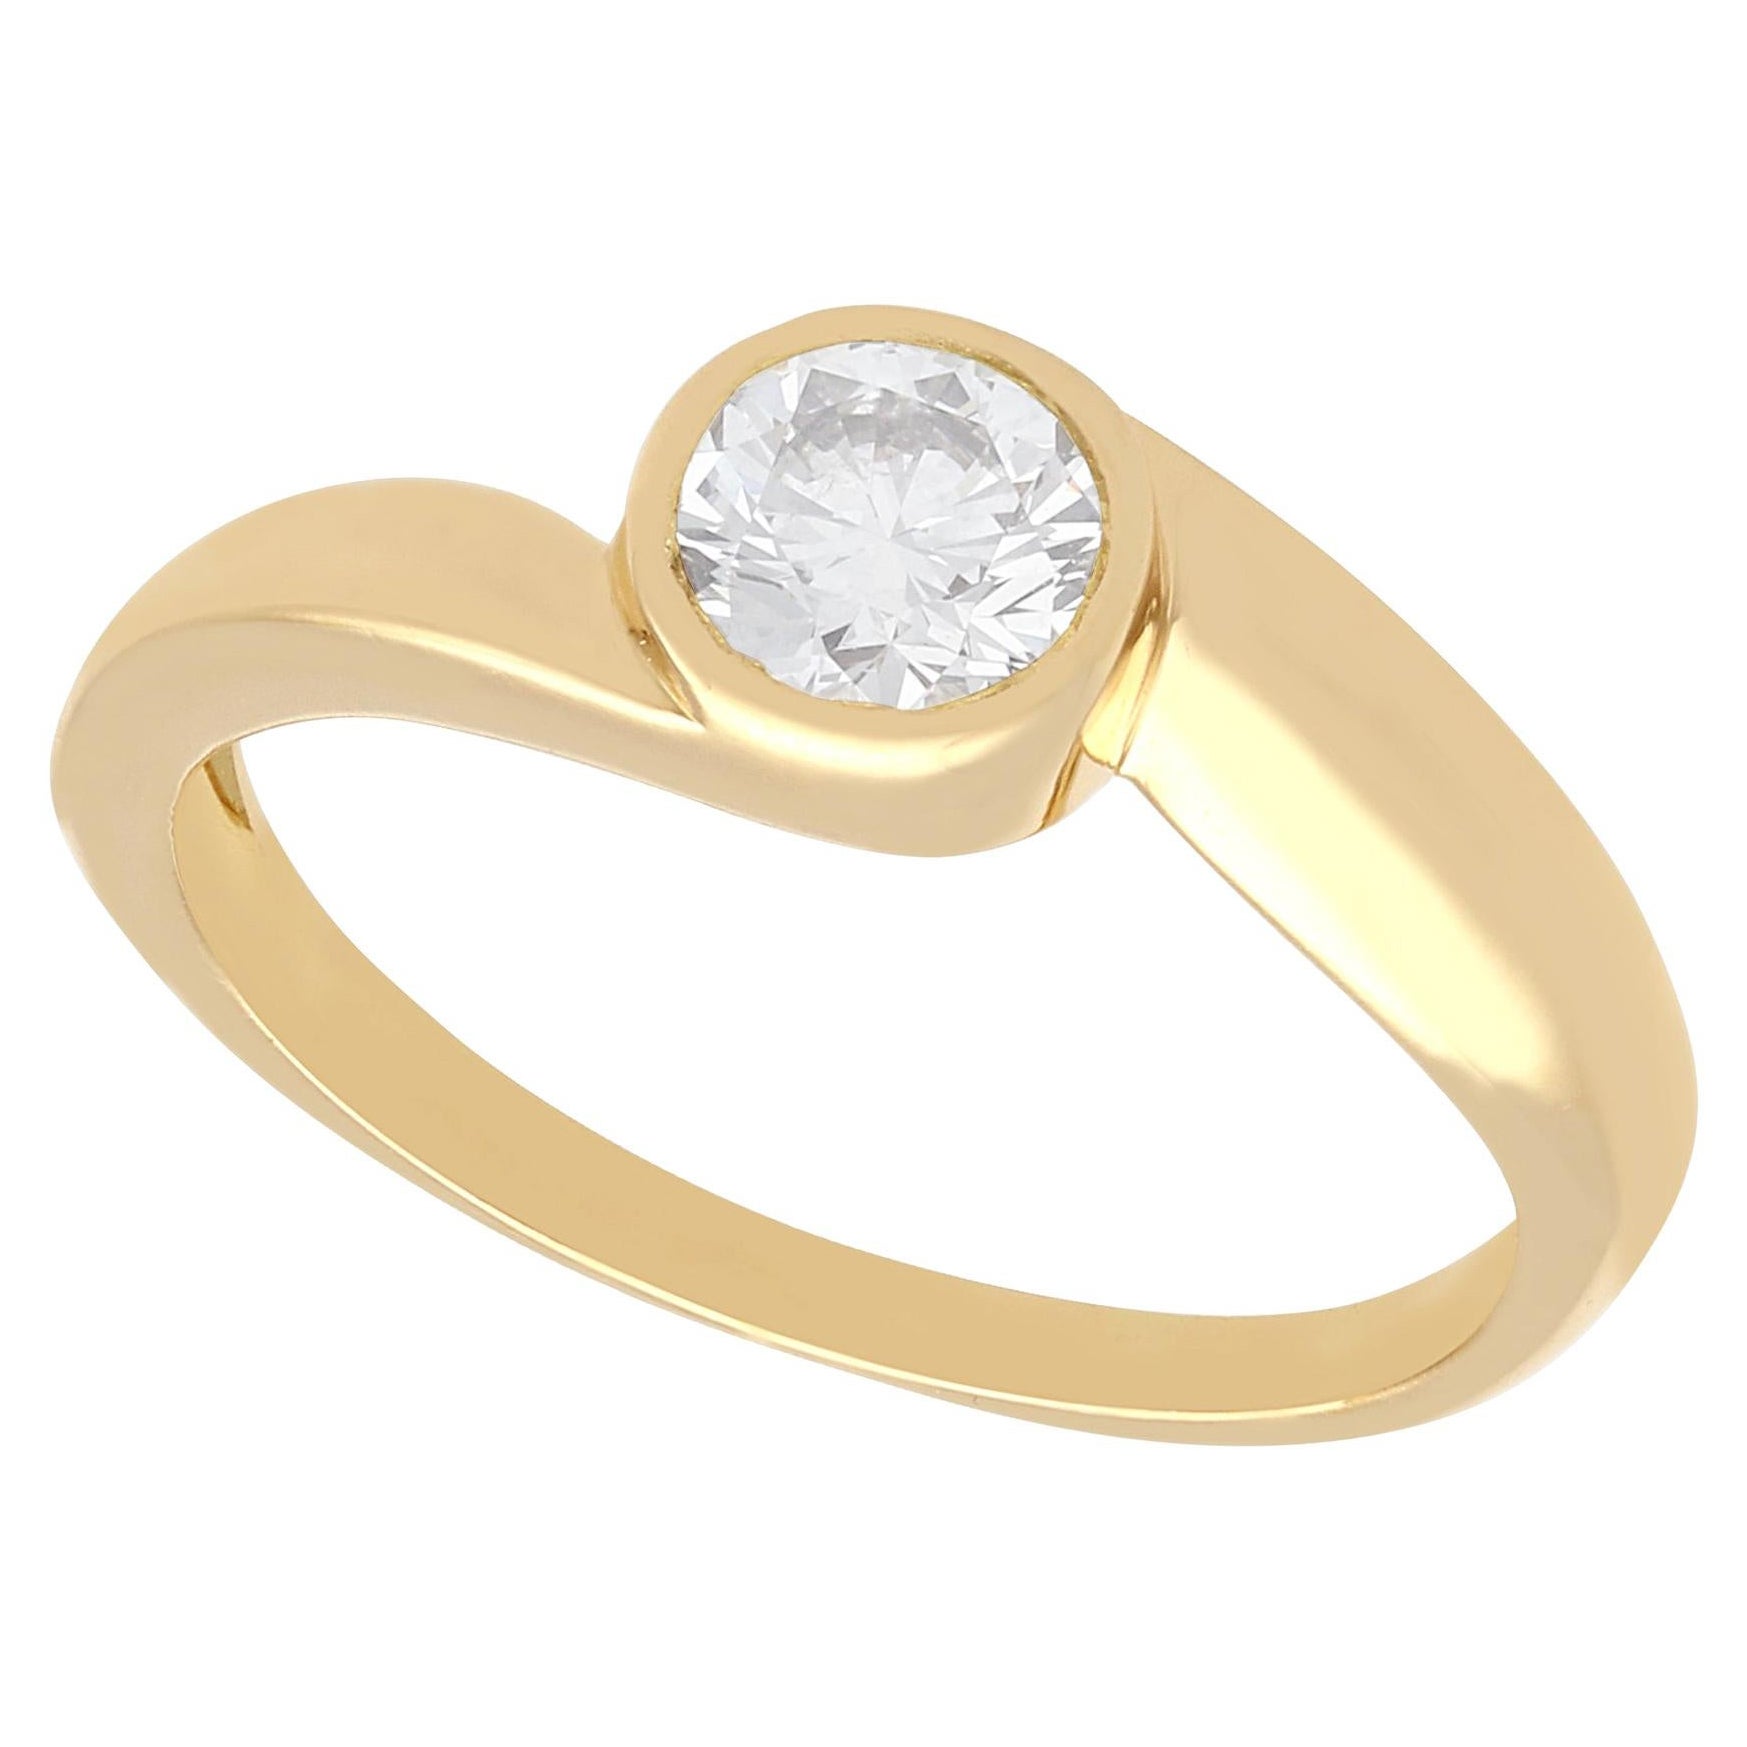 1950s French Diamond and Yellow Gold Twist Solitaire Ring